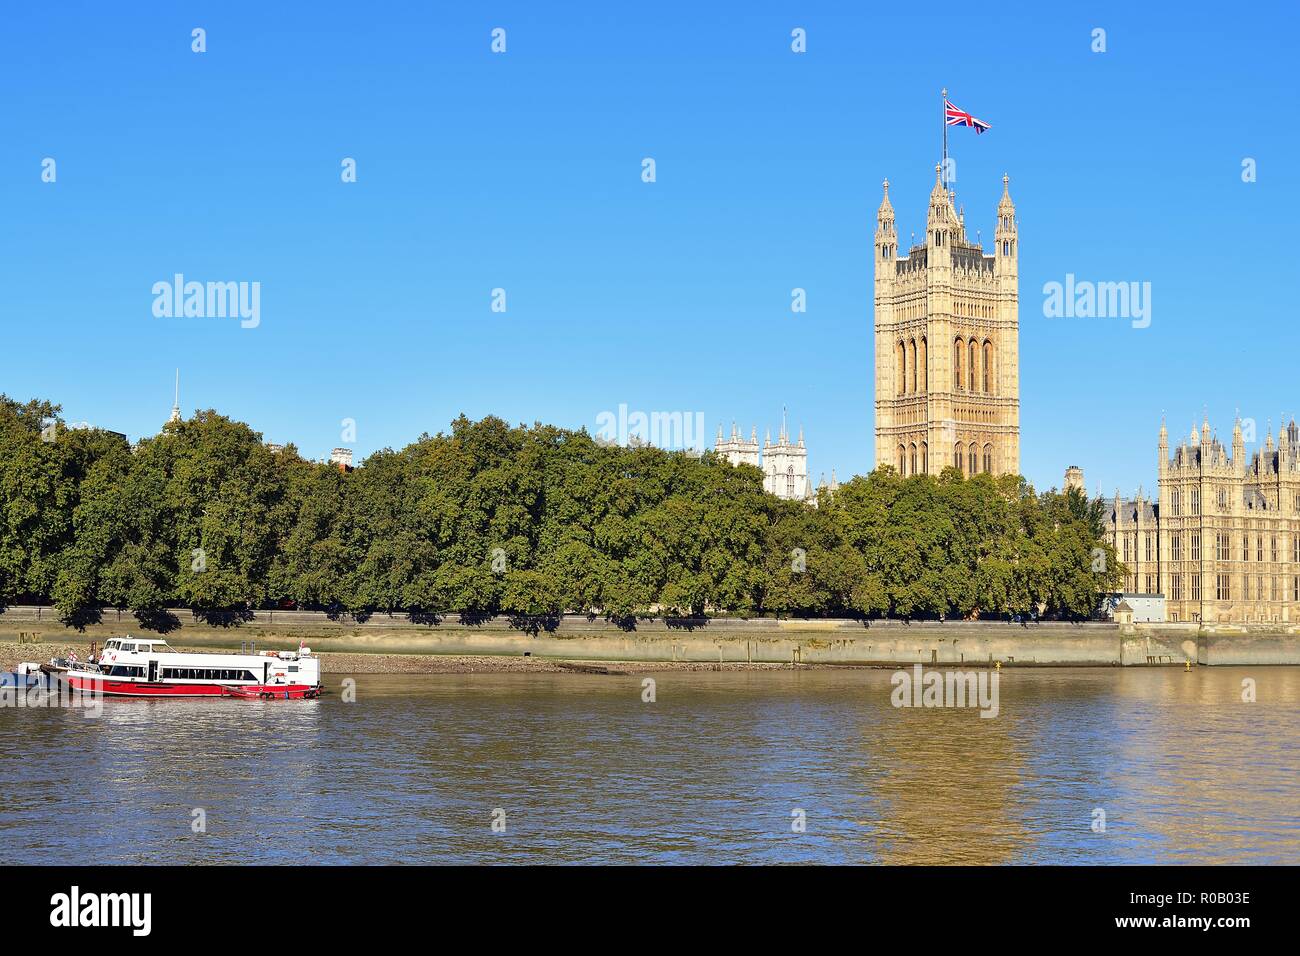 London, England, United Kingdom. Victoria Tower, with the Union Jack flying from its roof, and the Houses of Parliament beyond the River Thames. Stock Photo